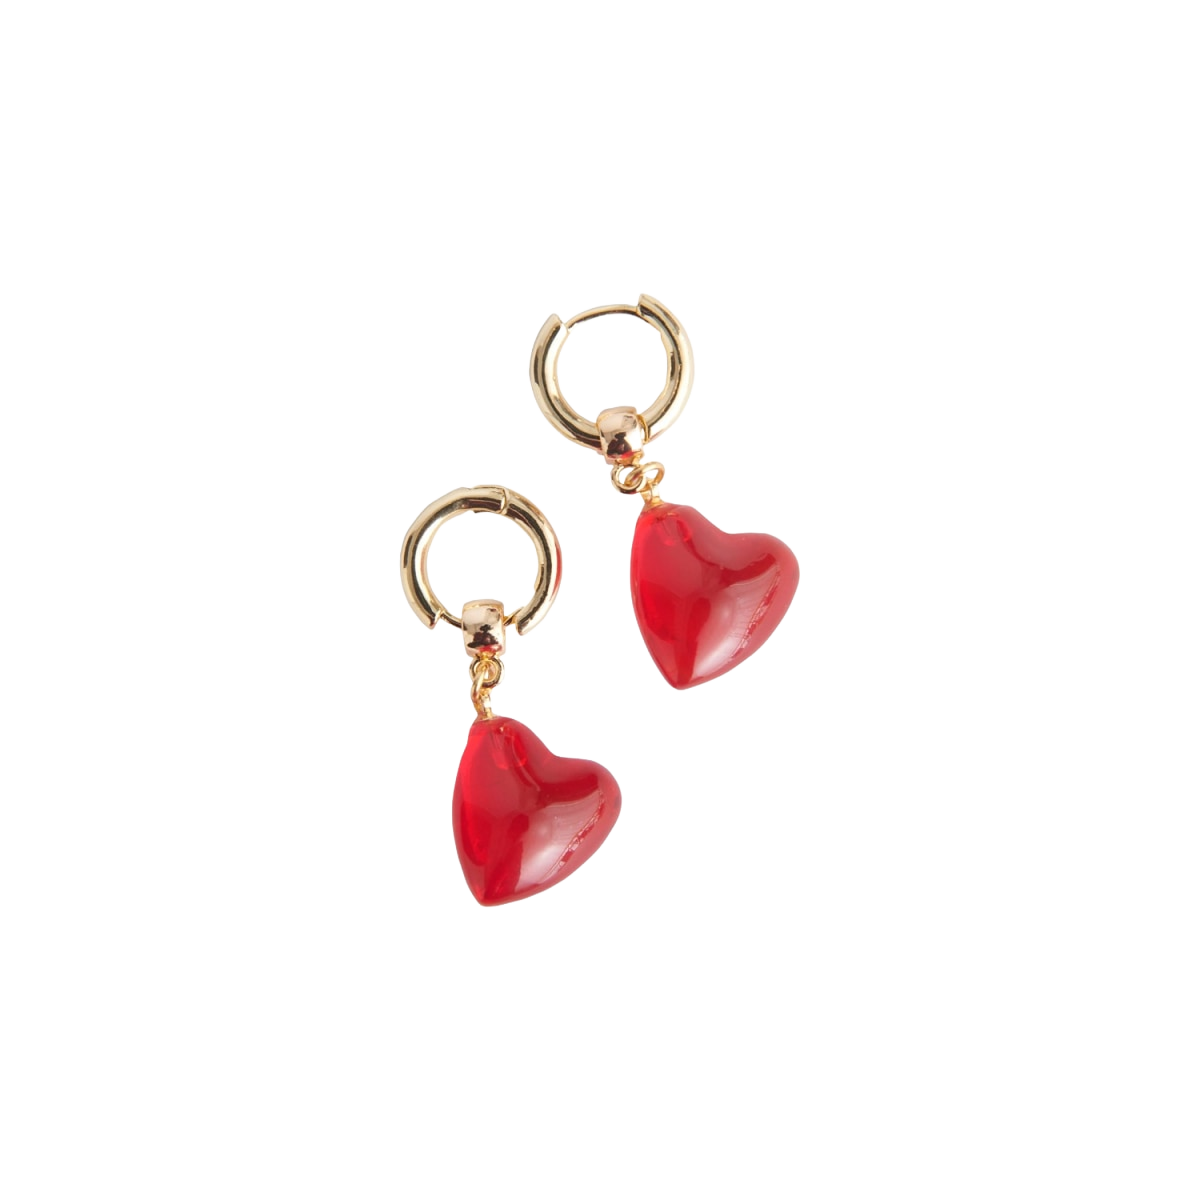 https://storage.googleapis.com/download/storage/v1/b/whering.appspot.com/o/marketplace_product_images%2Fpaisie-dangling-heart-earrings-red-98VNmygBW2PnZgWZwHZnnA.png?generation=1677690314961139&alt=media